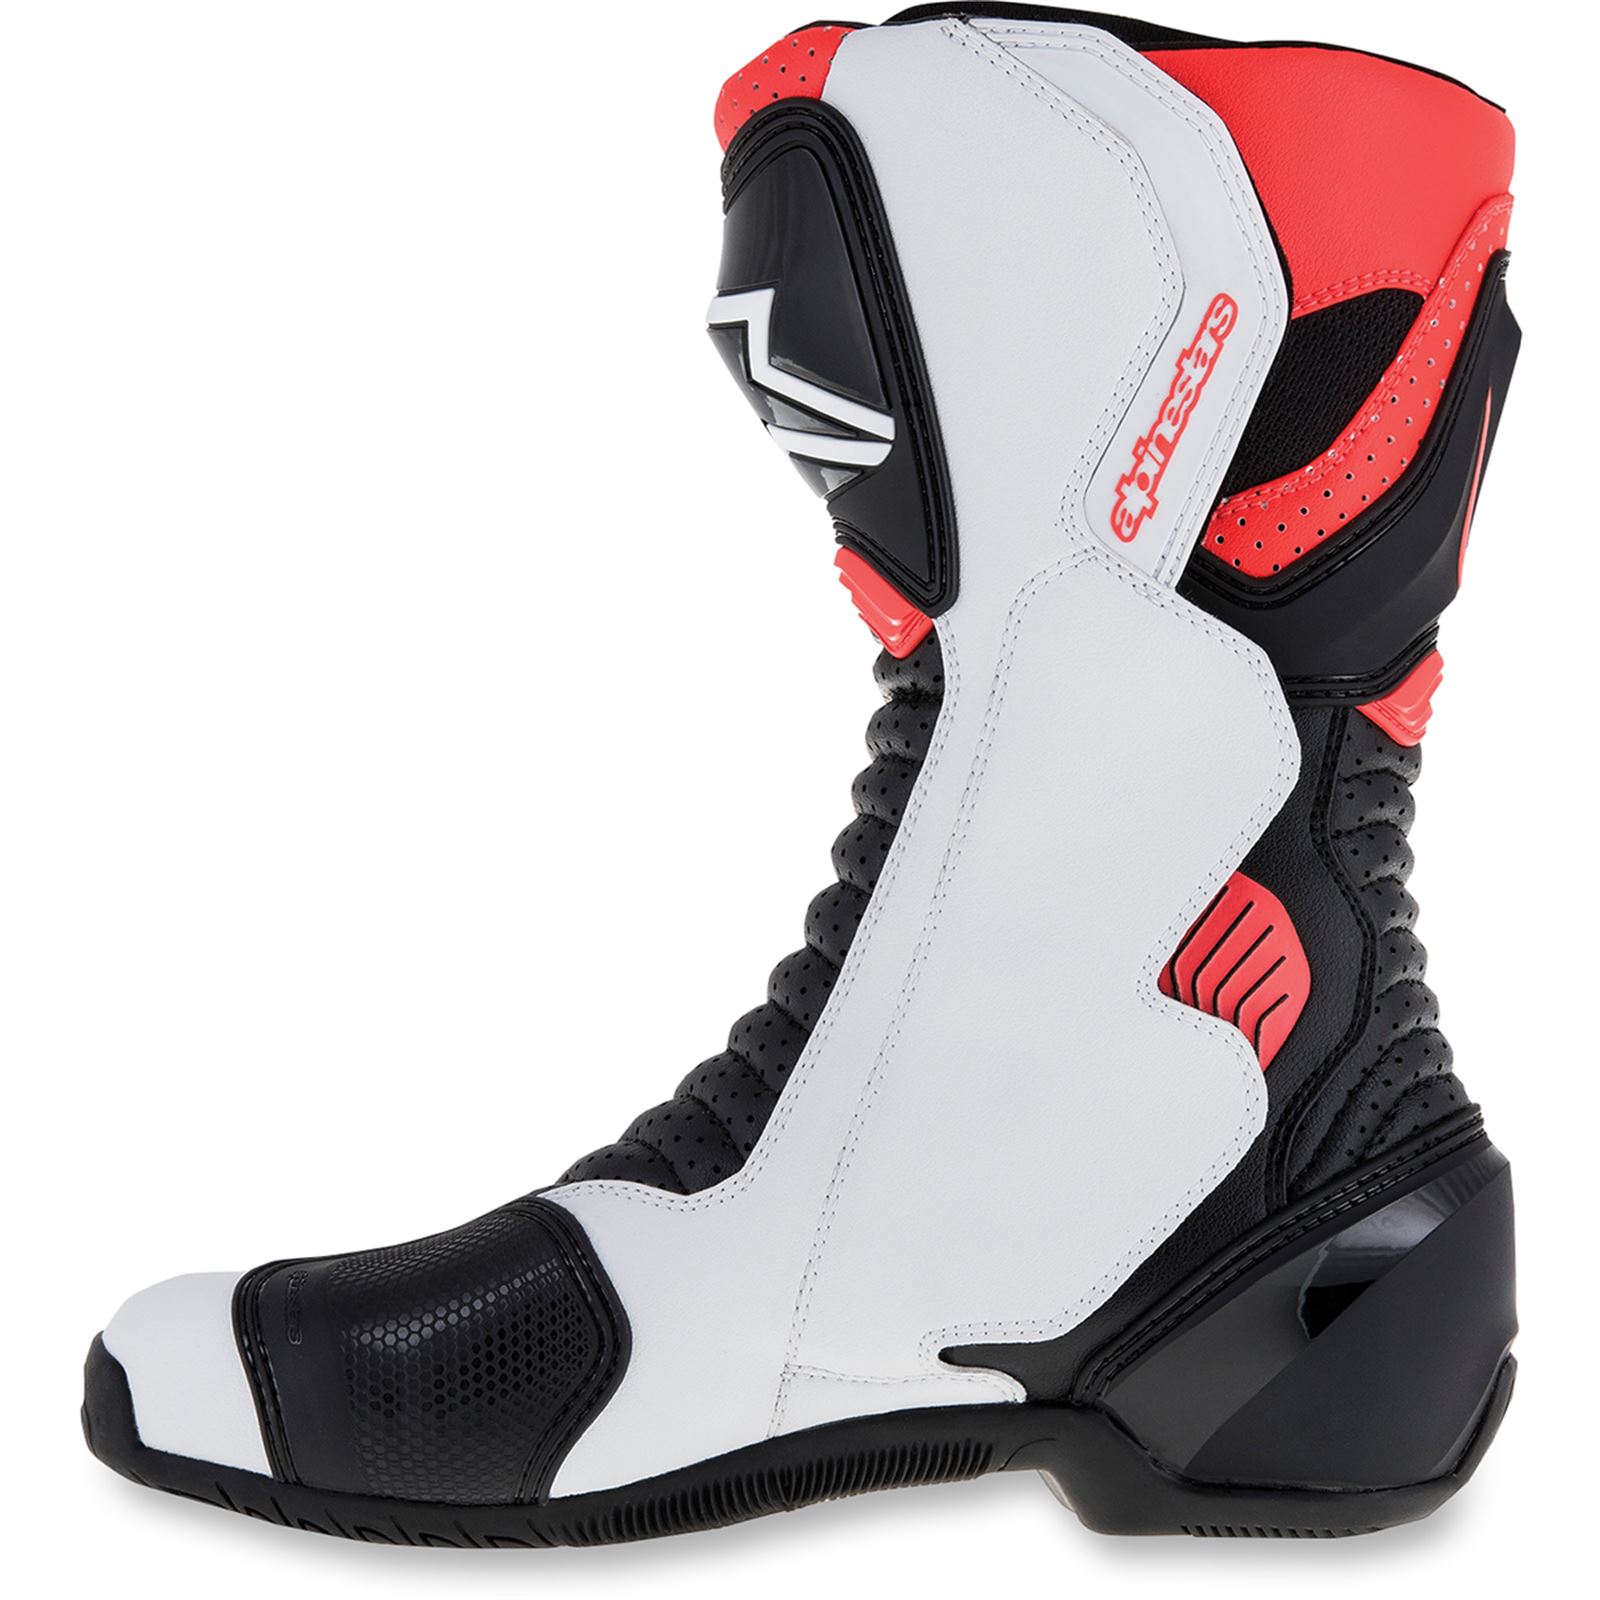 beddengoed heelal Pardon Alpinestars SMX-6 v2 Vented Boots - Black/White/Red Fluorescent - Size 9.5  - Motorcycle, ATV / UTV & Powersports Parts | The Best Powersports,  Motorcycle, ATV & Snow Gear, Accessories and More